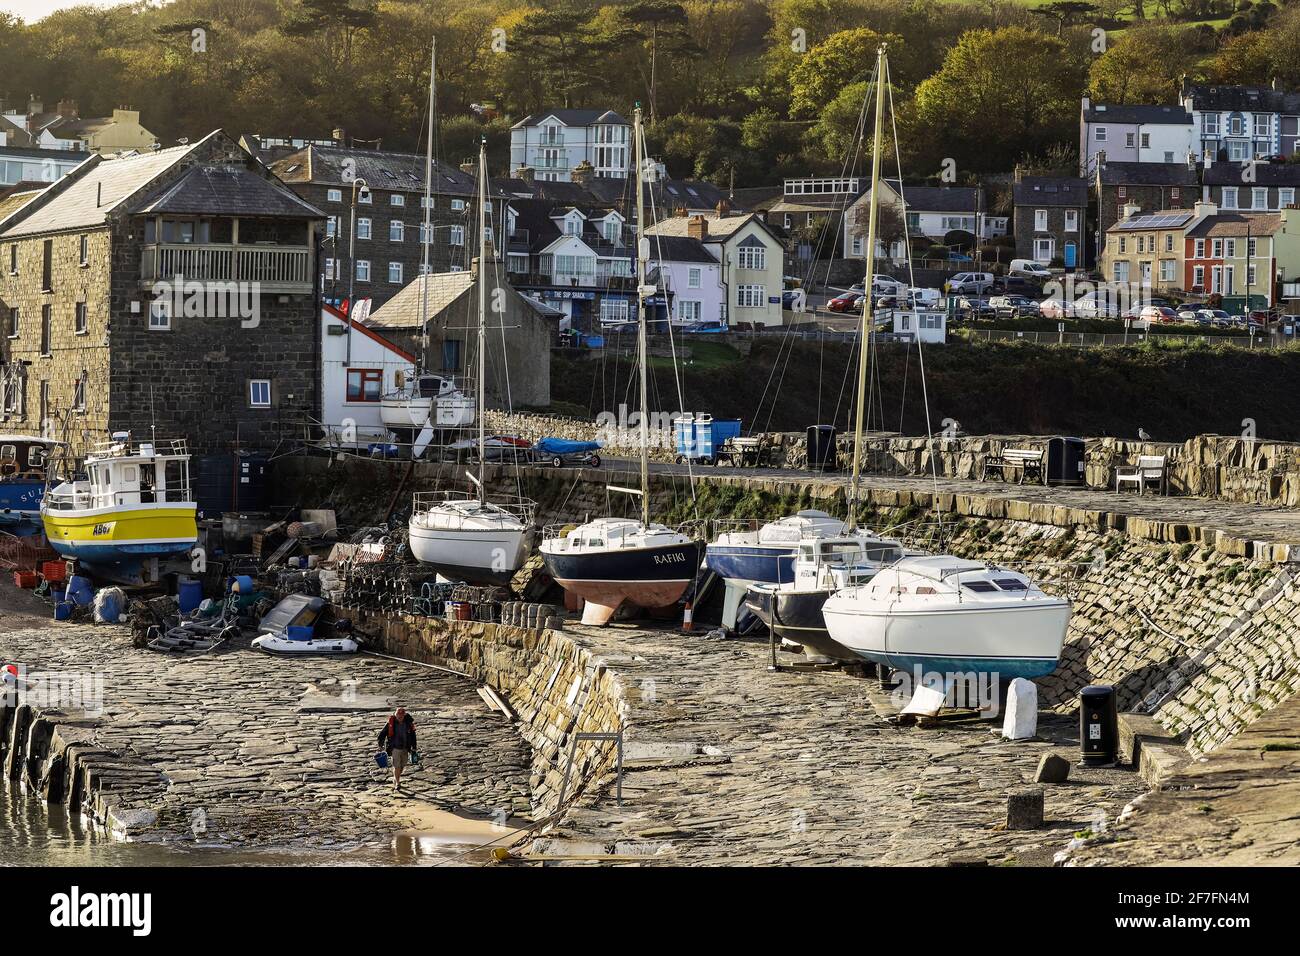 View from harbour to this popular town for commercial fishing, dolphin watching and tourism, New Quay, Ceredigion, Wales, United Kingdom, Europe Stock Photo